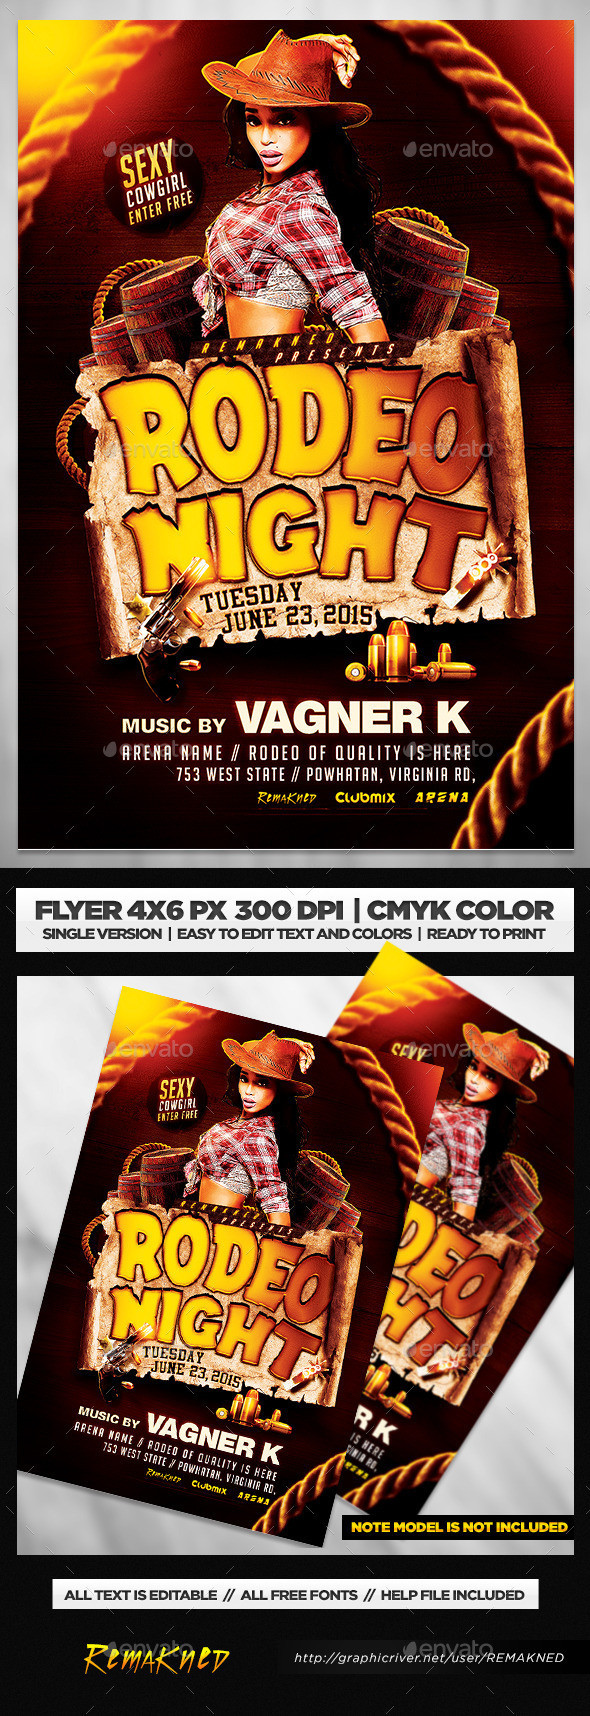 Rodeo 20night 20flyer 20template 20psd